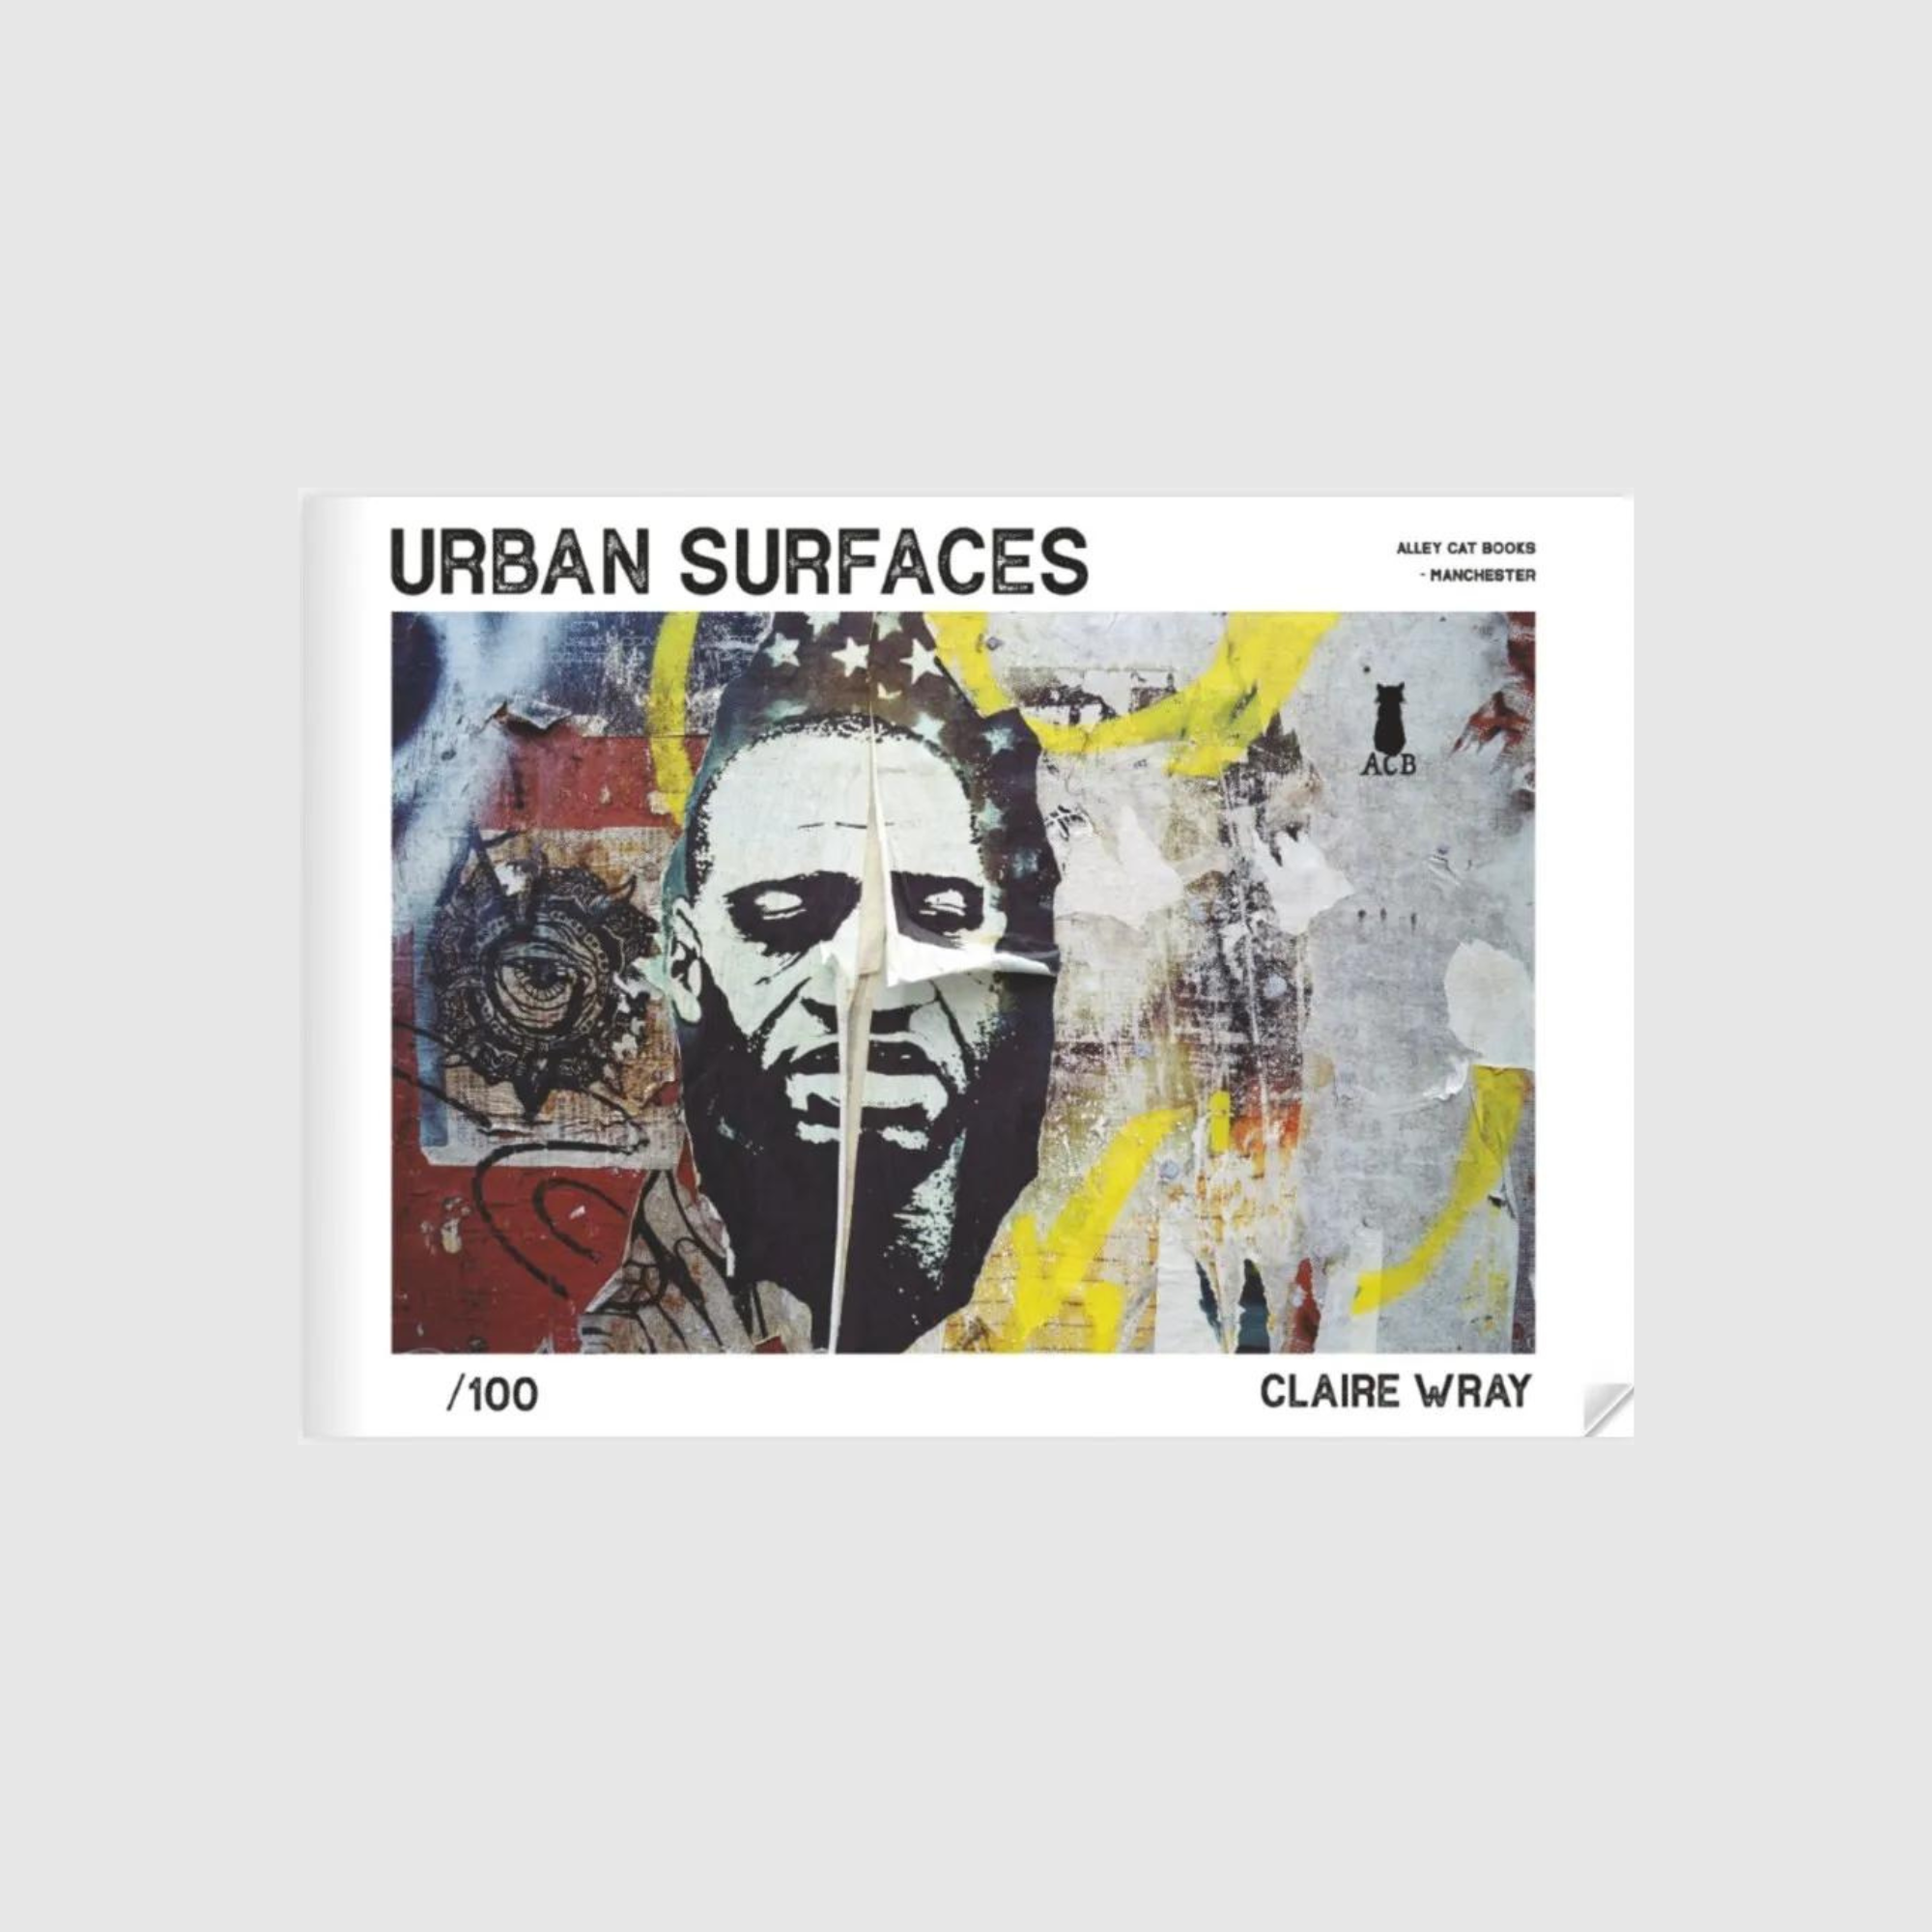 Cover of the zine "Urban Surfaces" by Claire Wray. The cover features a textured wall with a street art image of a man's face, partially peeled. The zine title "Urban Surfaces" is prominently displayed at the top, with "Claire Wray" and "Alley Cat Books, Manchester" printed on the bottom right. The edition is noted as "/100"